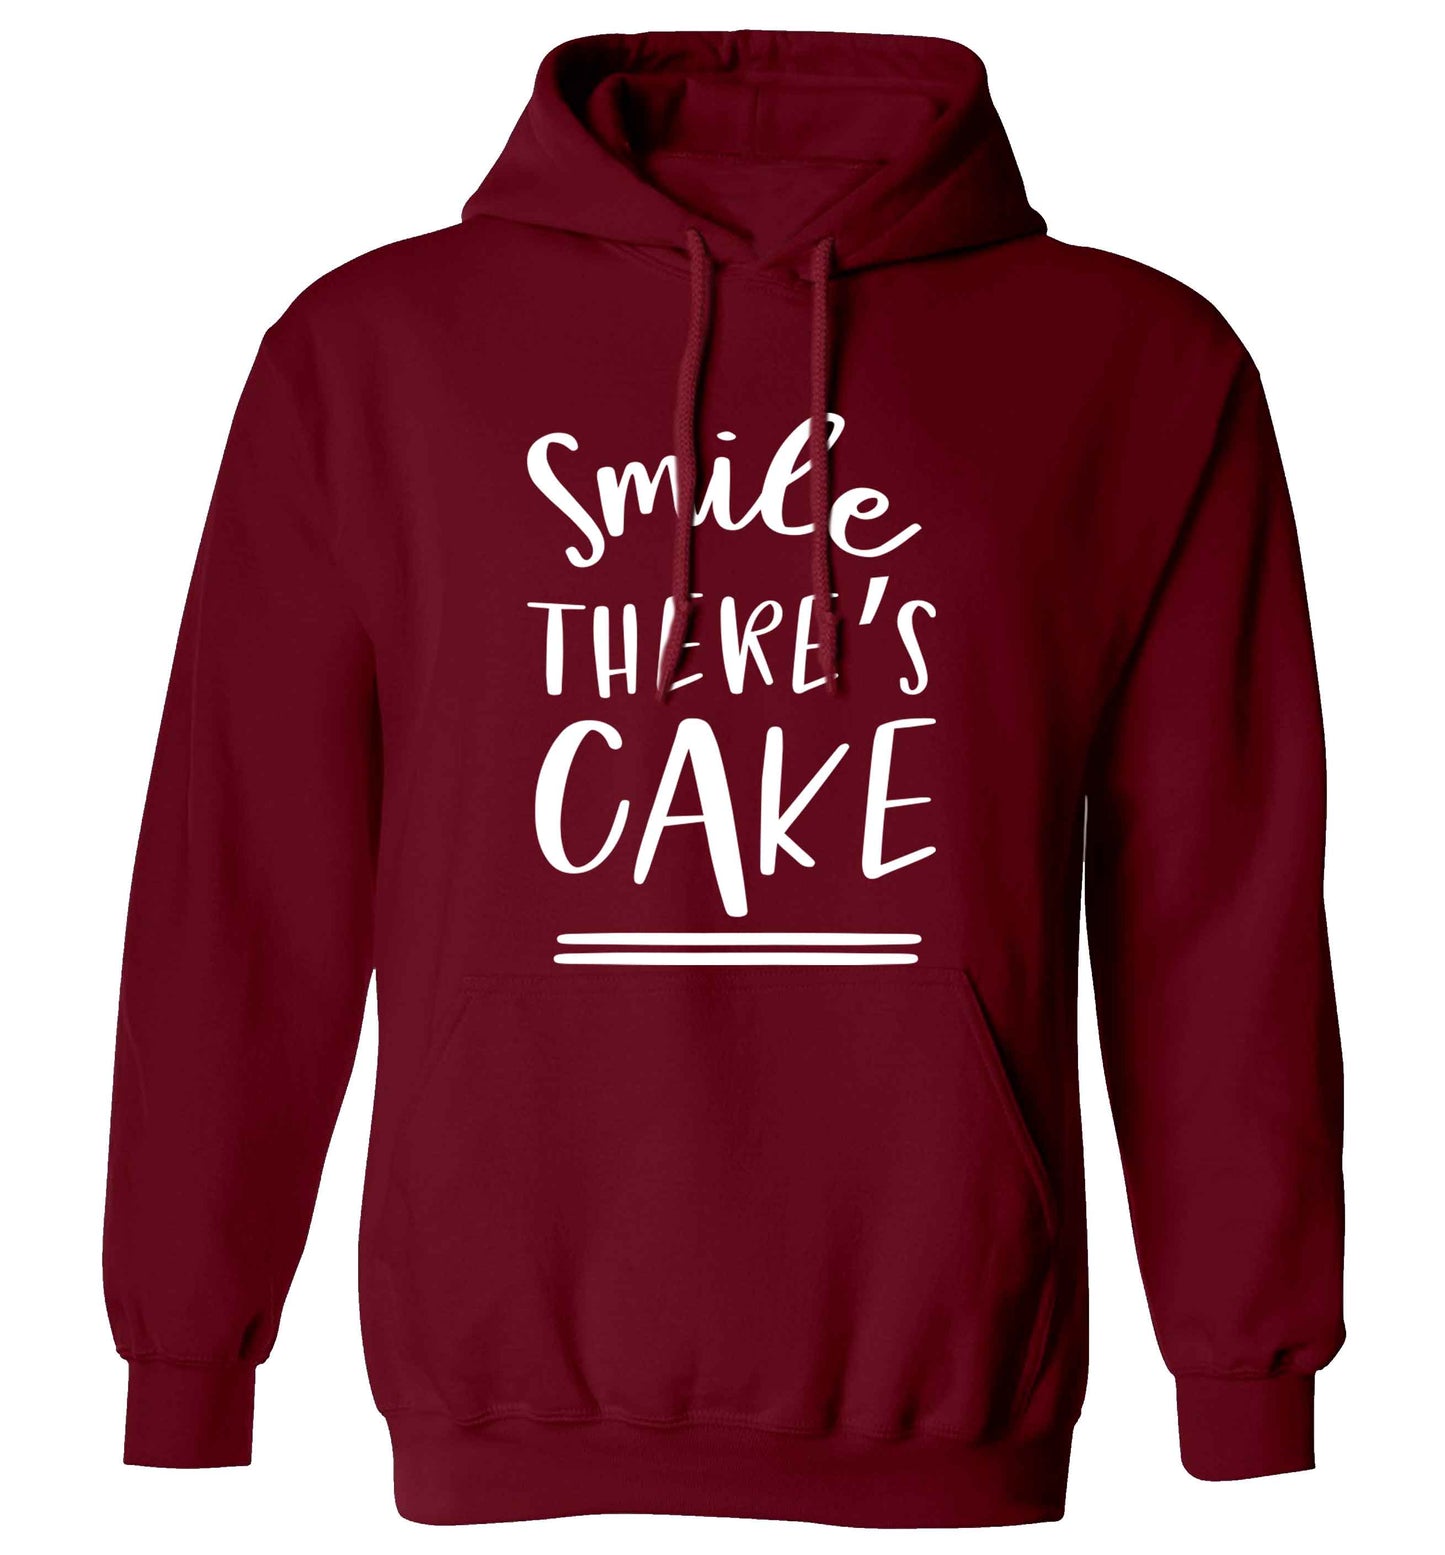 Smile there's cake adults unisex maroon hoodie 2XL